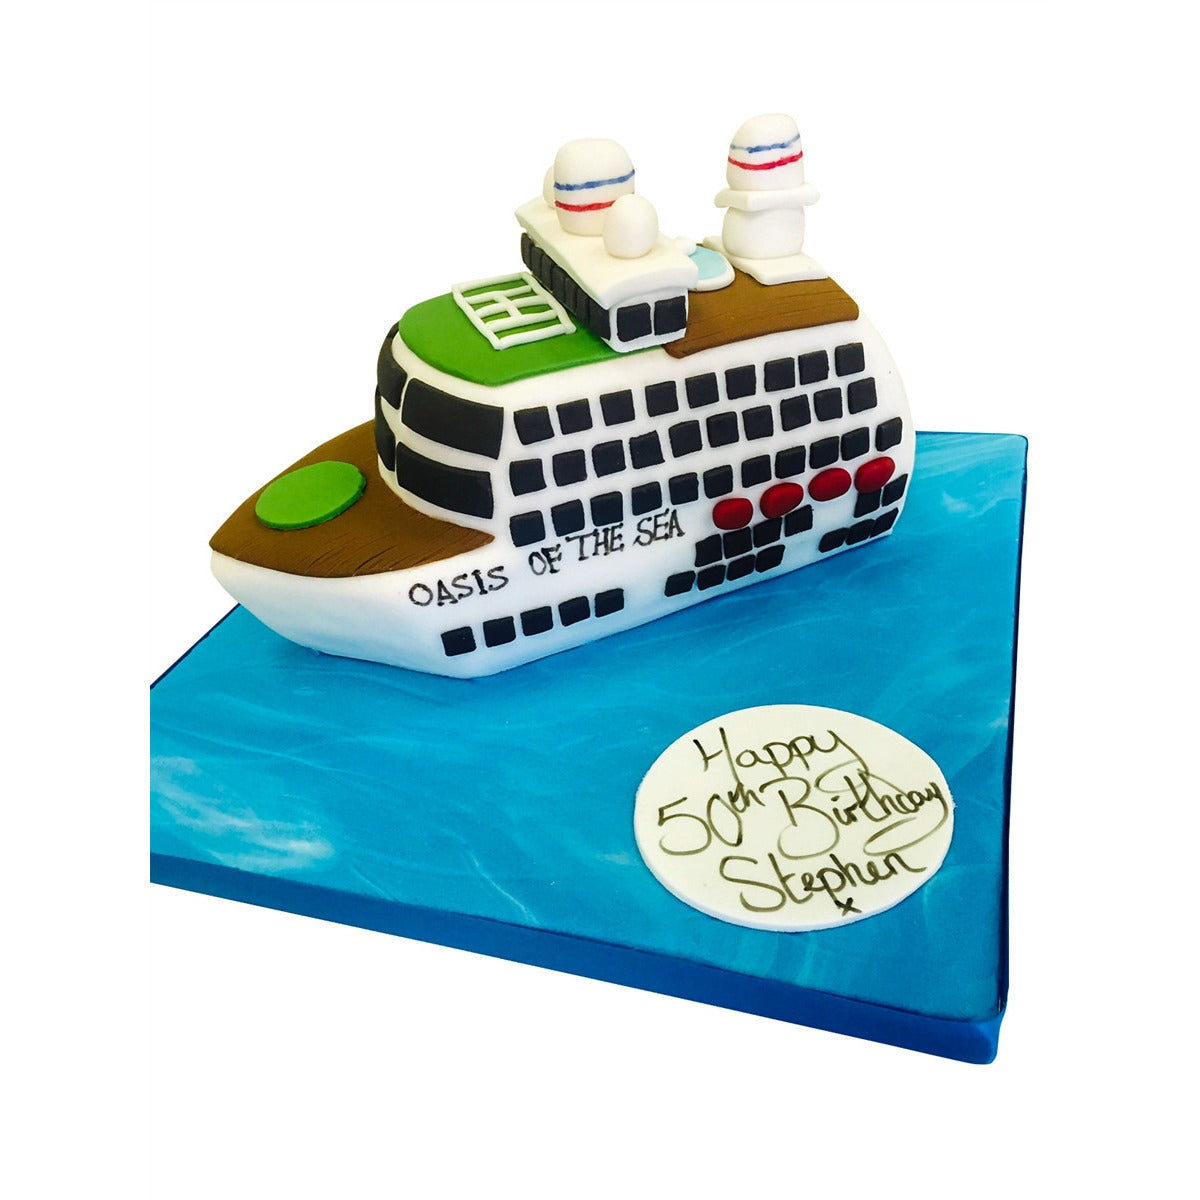 Pirate Ship Cake - Buy Online, Free UK Delivery — New Cakes